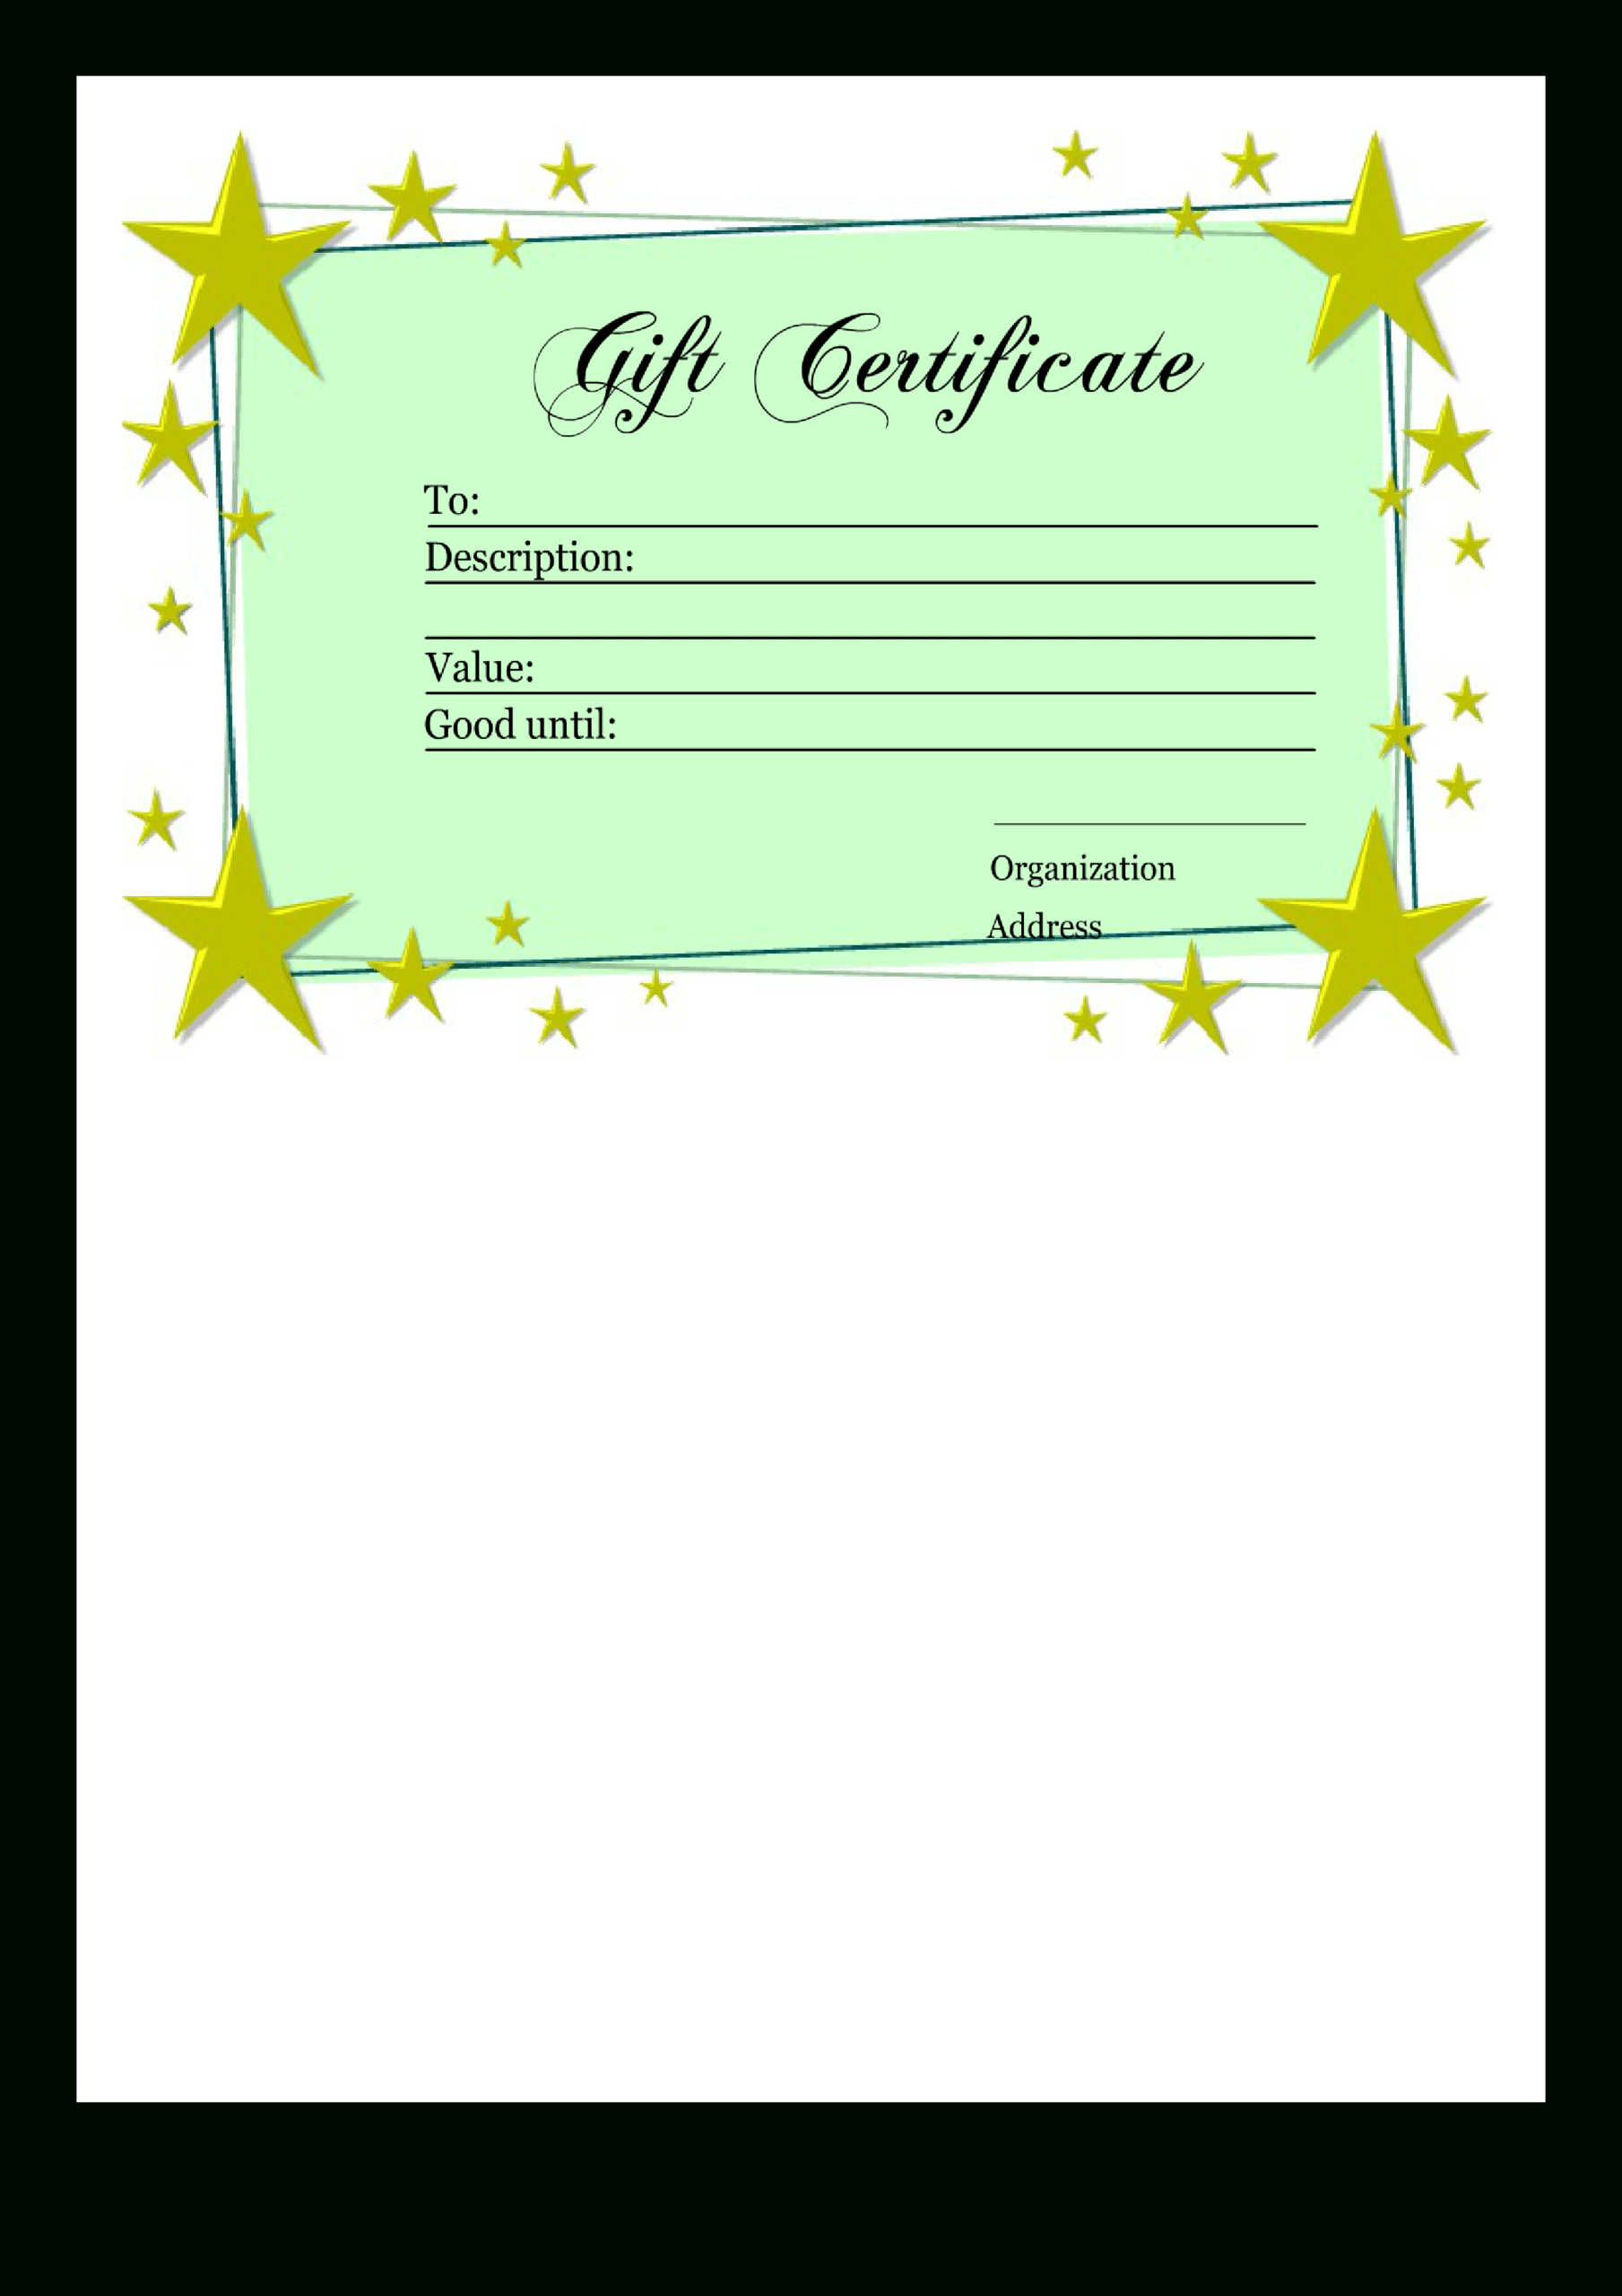 Homemade Gift Certificate Template | Templates At Inside Homemade Gift Certificate Template